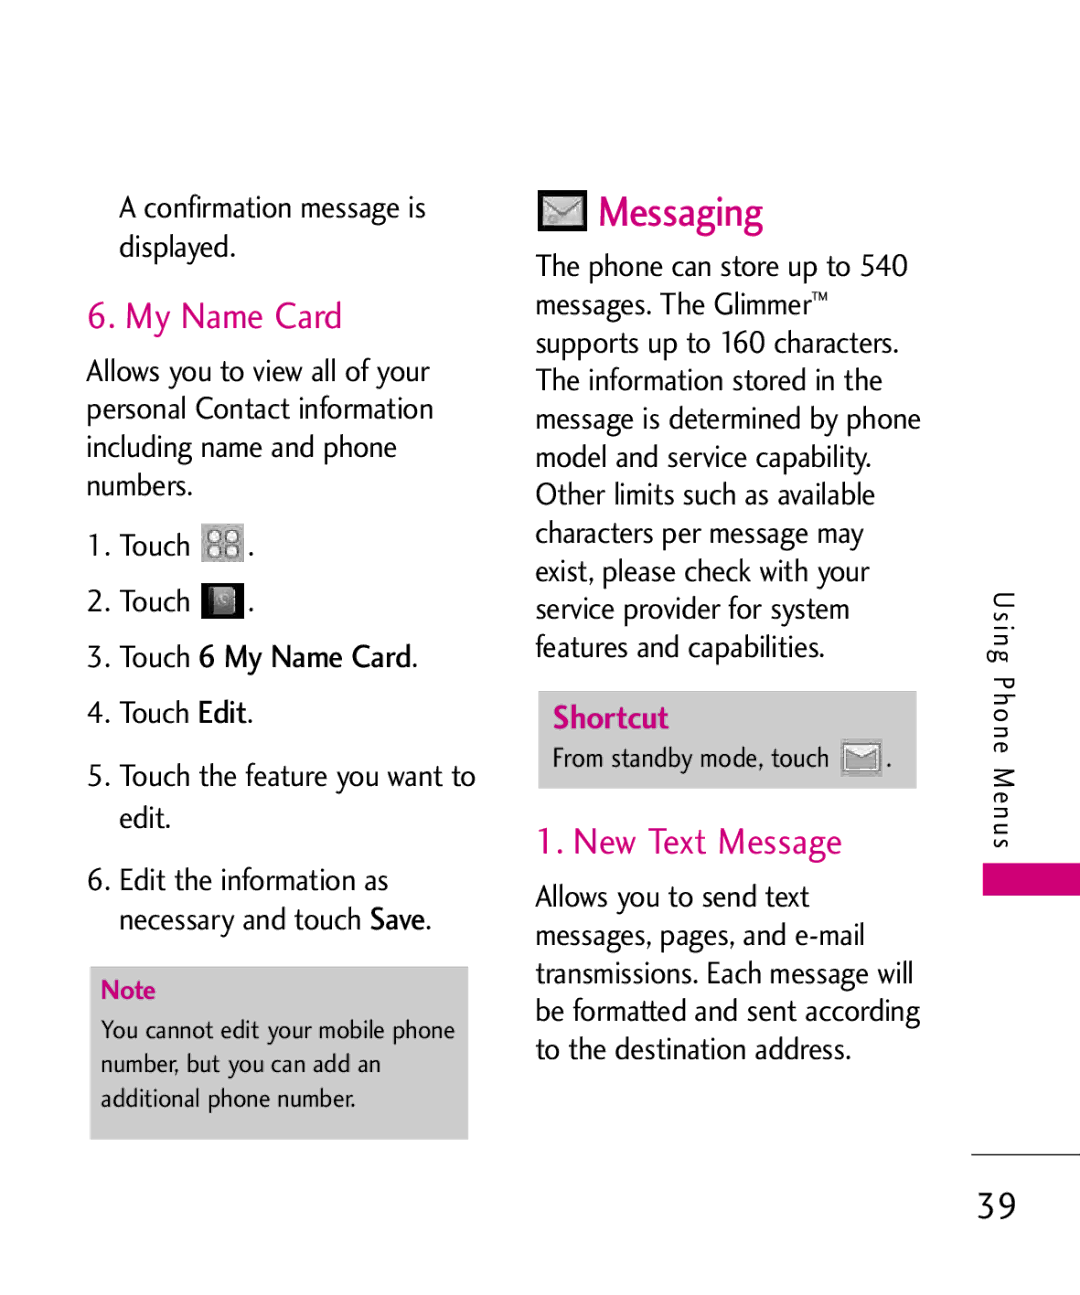 LG Electronics Glimmer manual Messaging, New Text Message, Touch 6 My Name Card 